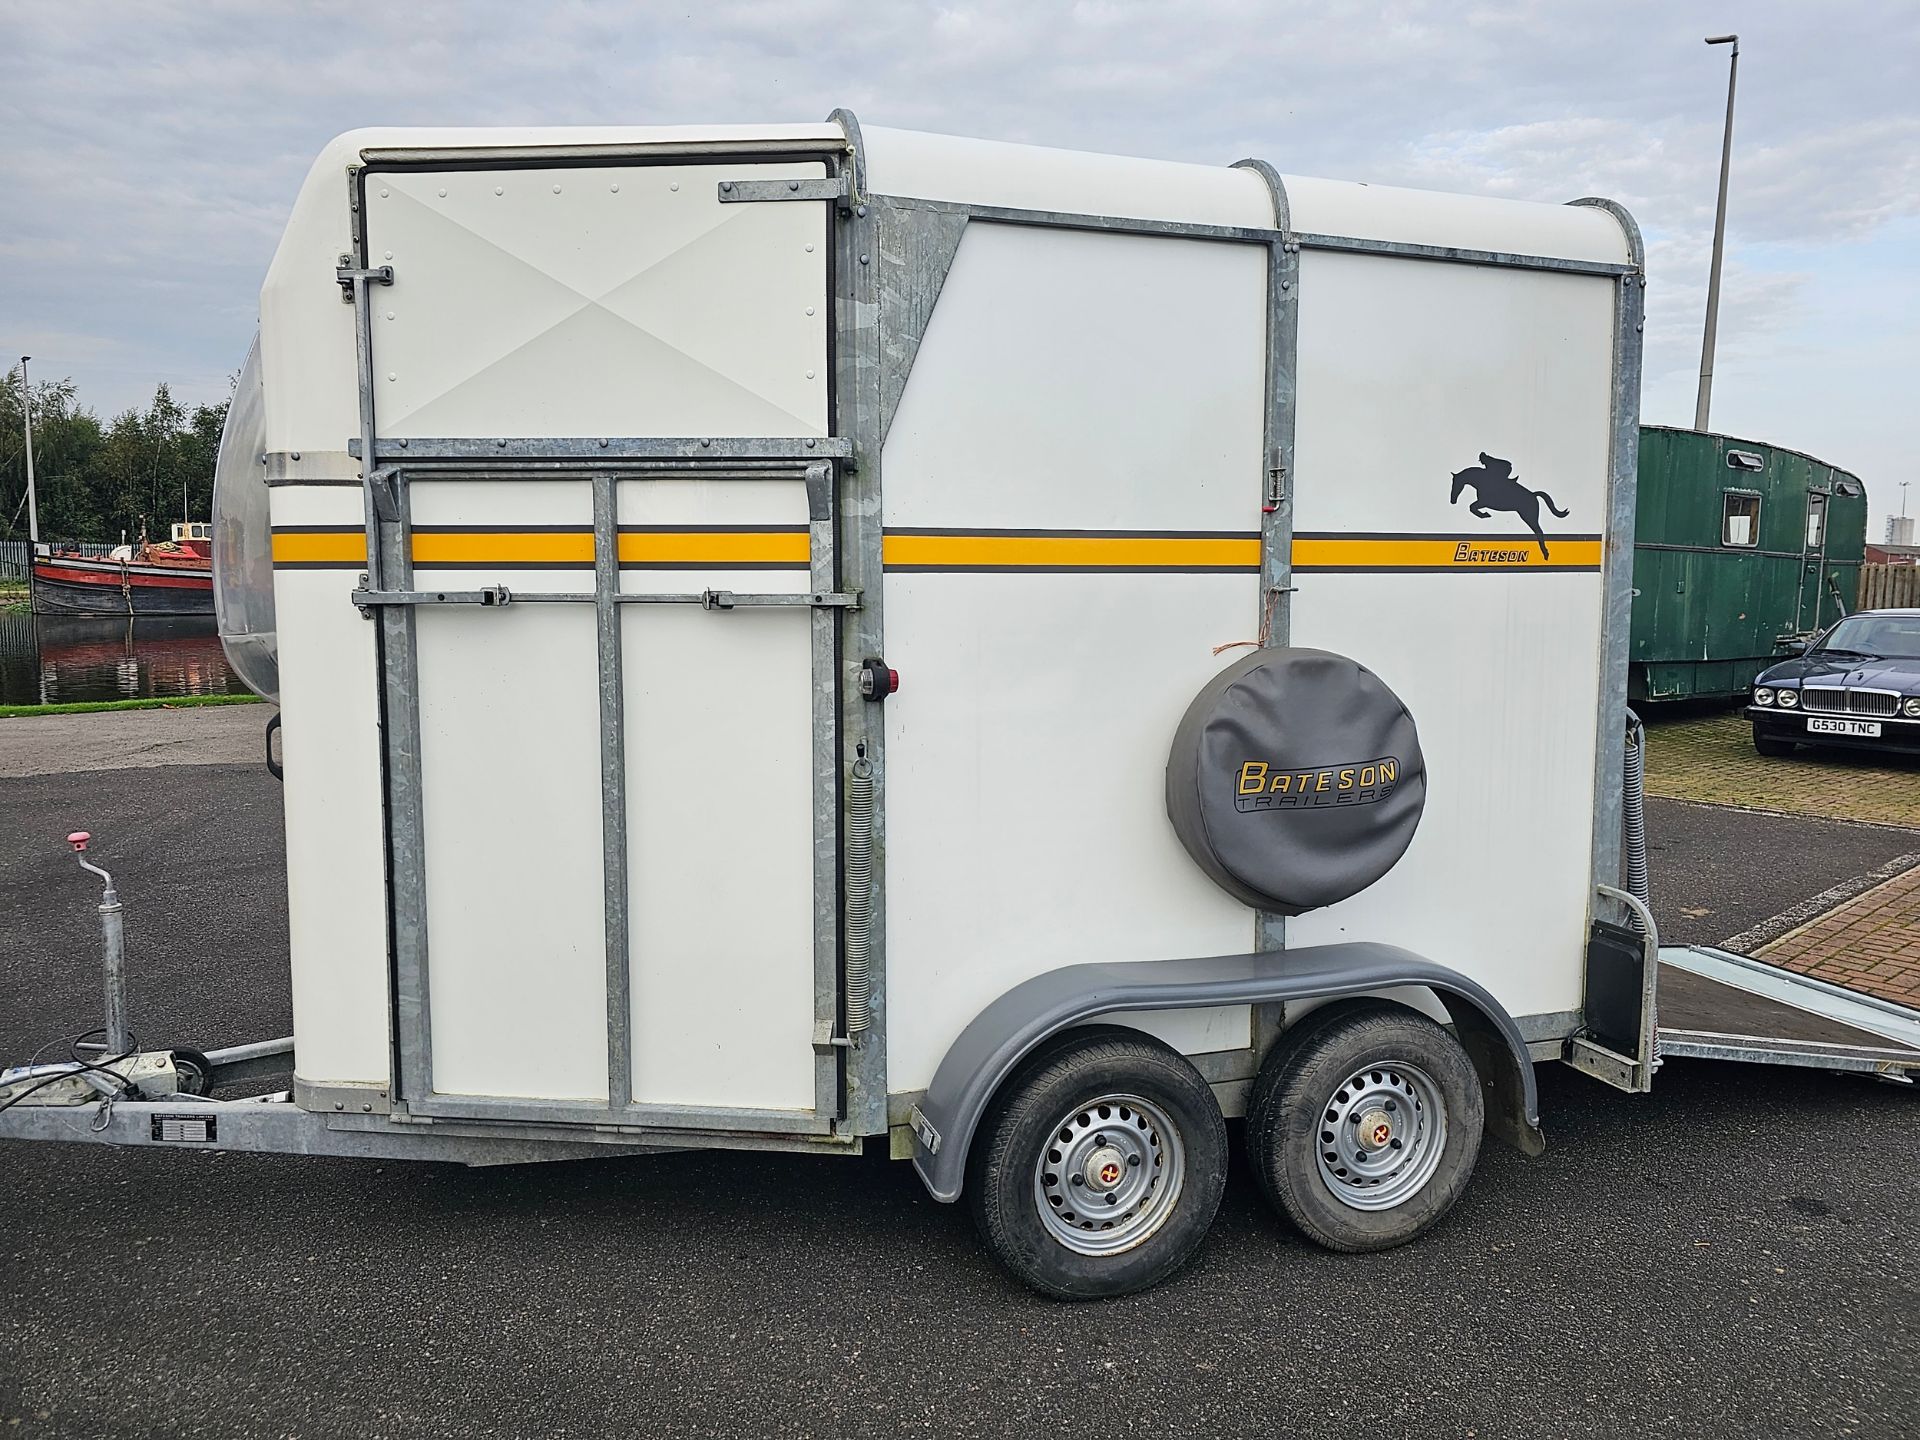 A Bateson Deauville horse trailer, 2300kg weight limit, with composite floor, very little use and - Image 13 of 16